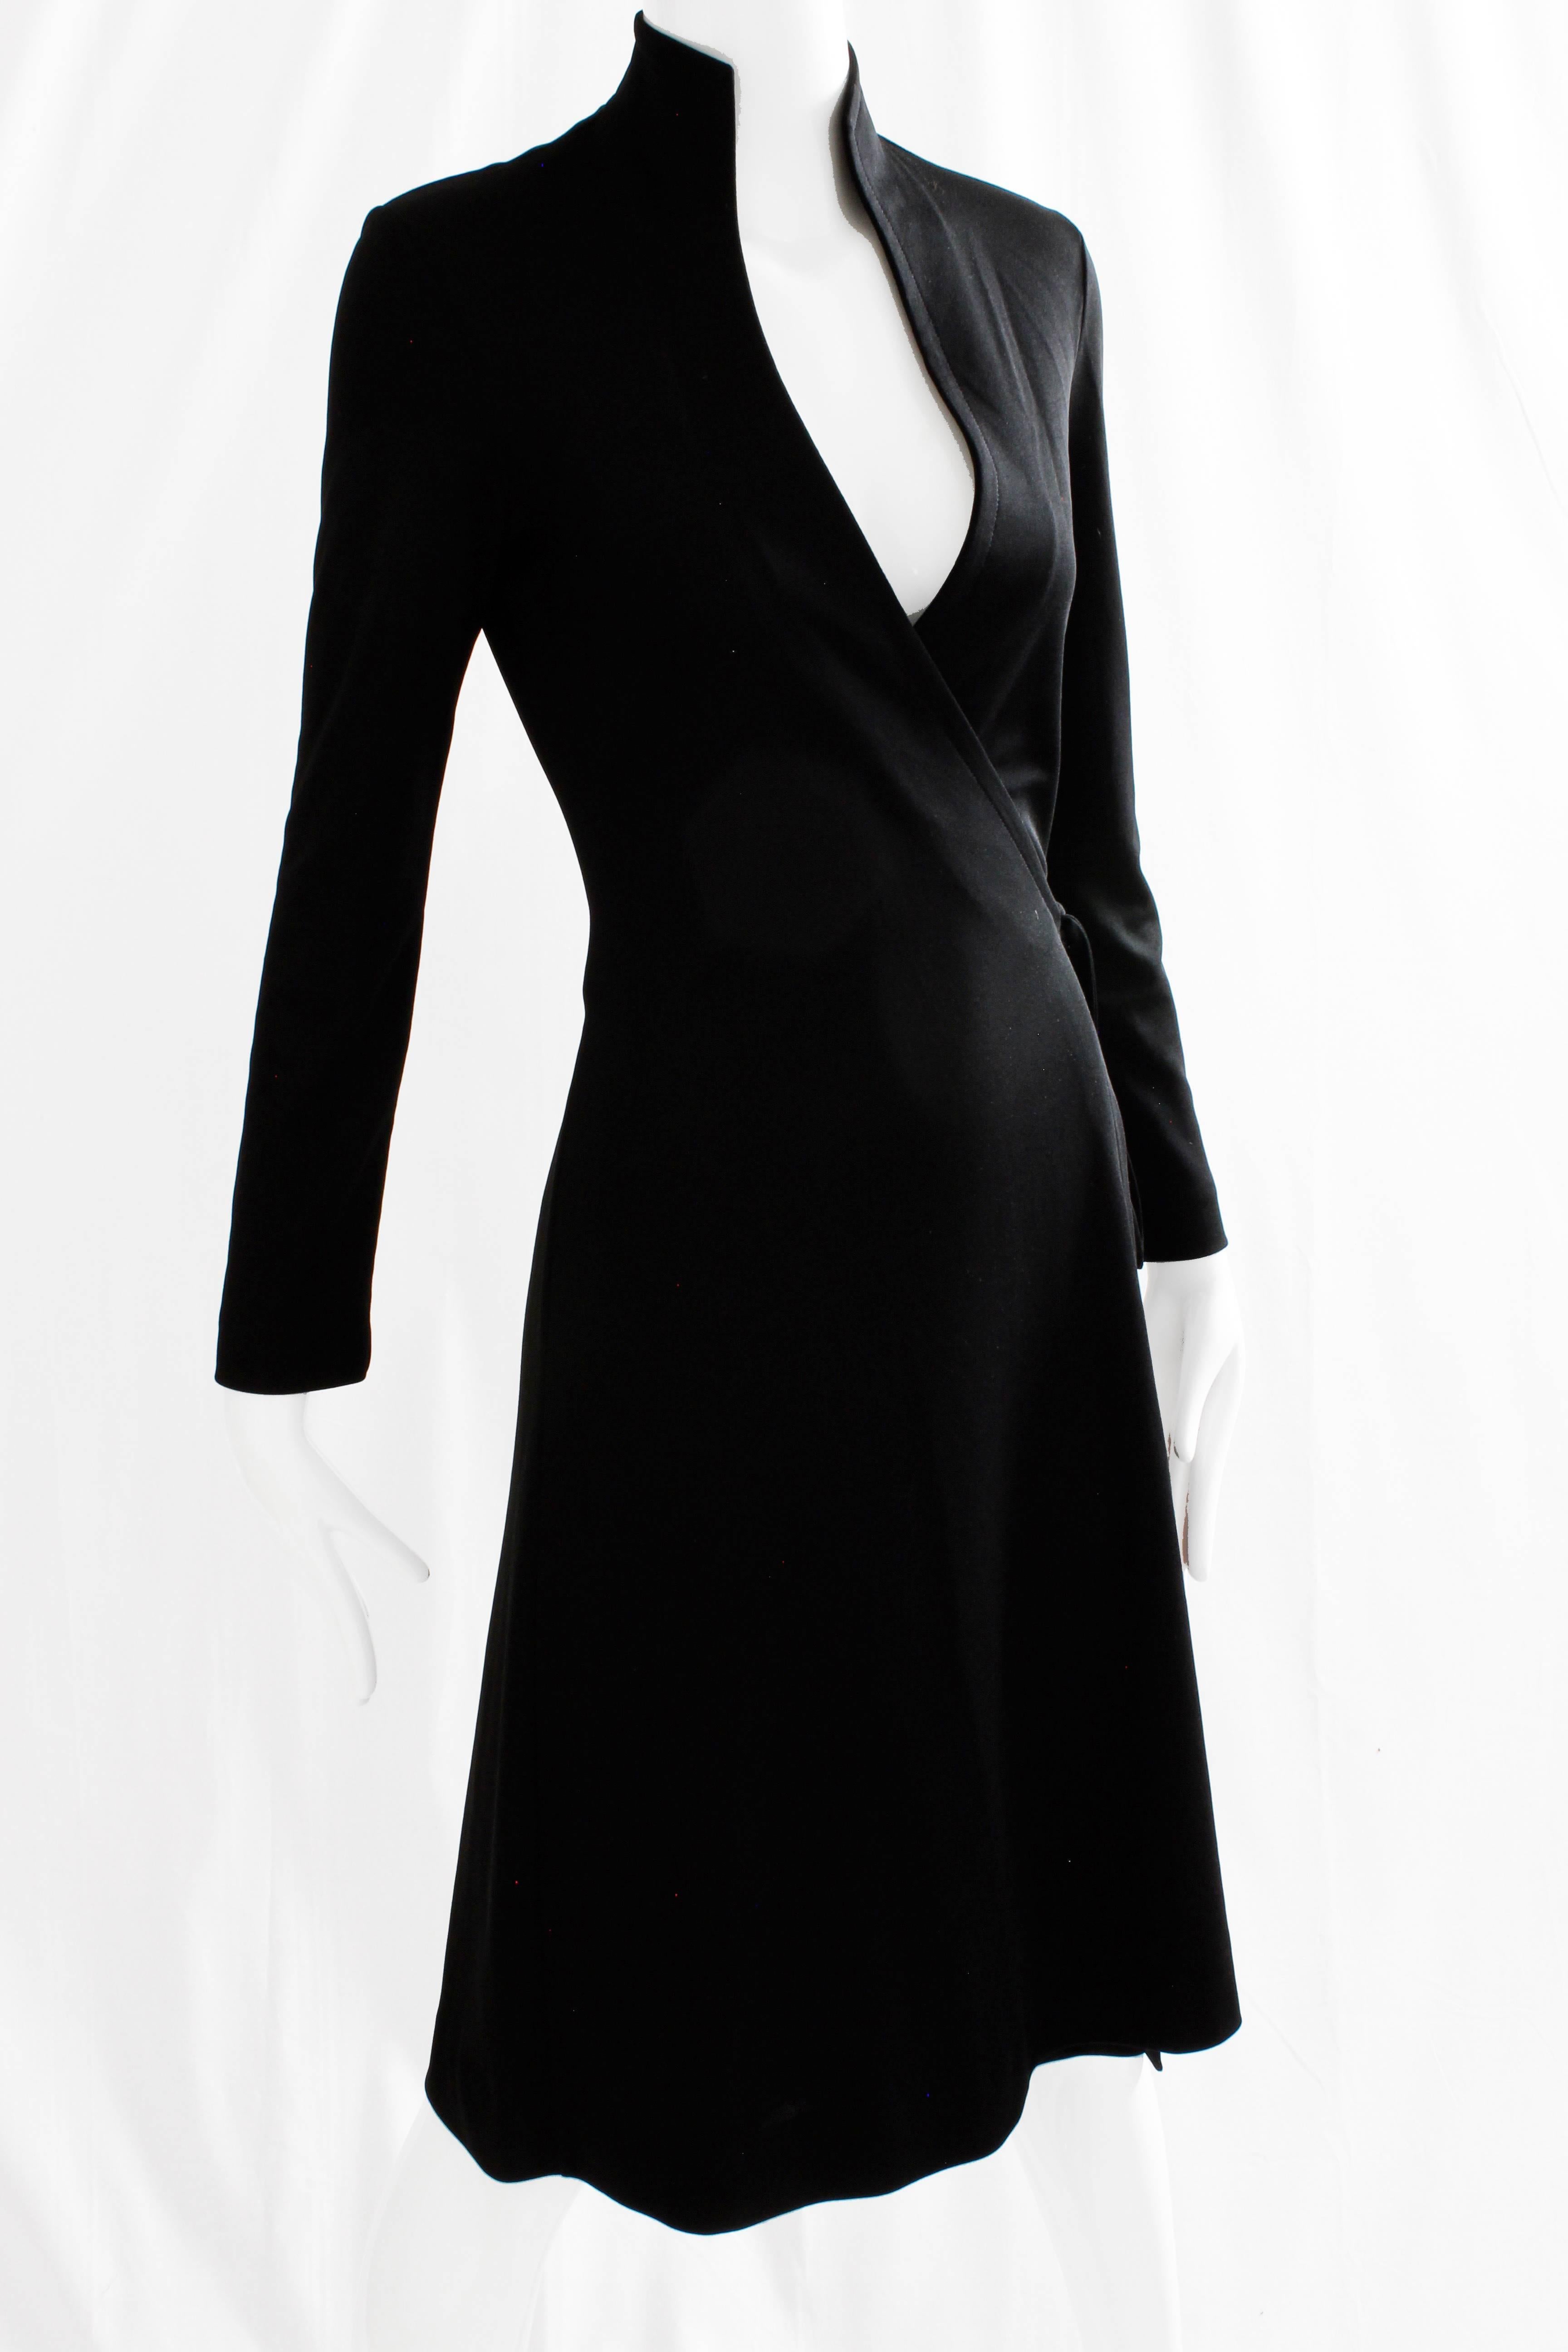 This chic little black dress was made by Clovis Ruffin for his Ruffinwear line, most likely in the late 1970s.  Made from a black knit jersey fabric, it features a true wrap design with a swan neck collar.  Simple and sophisticated, it's perfect for